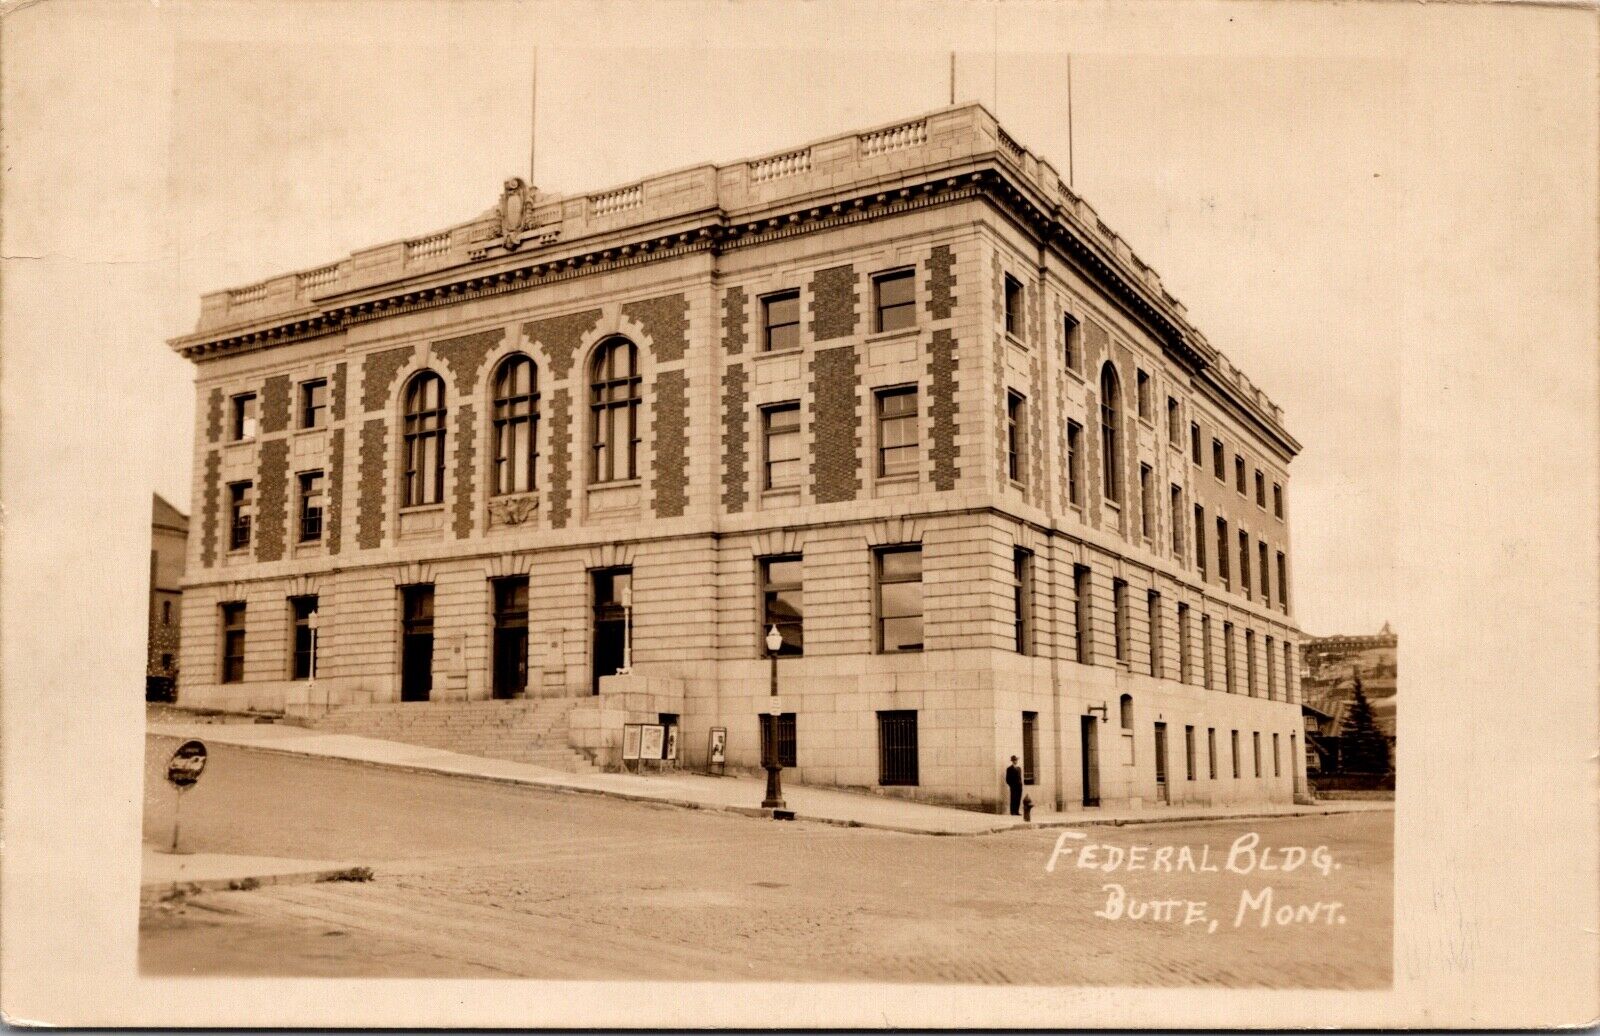 Real Photo Postcard Federal Building in Butte, Montana